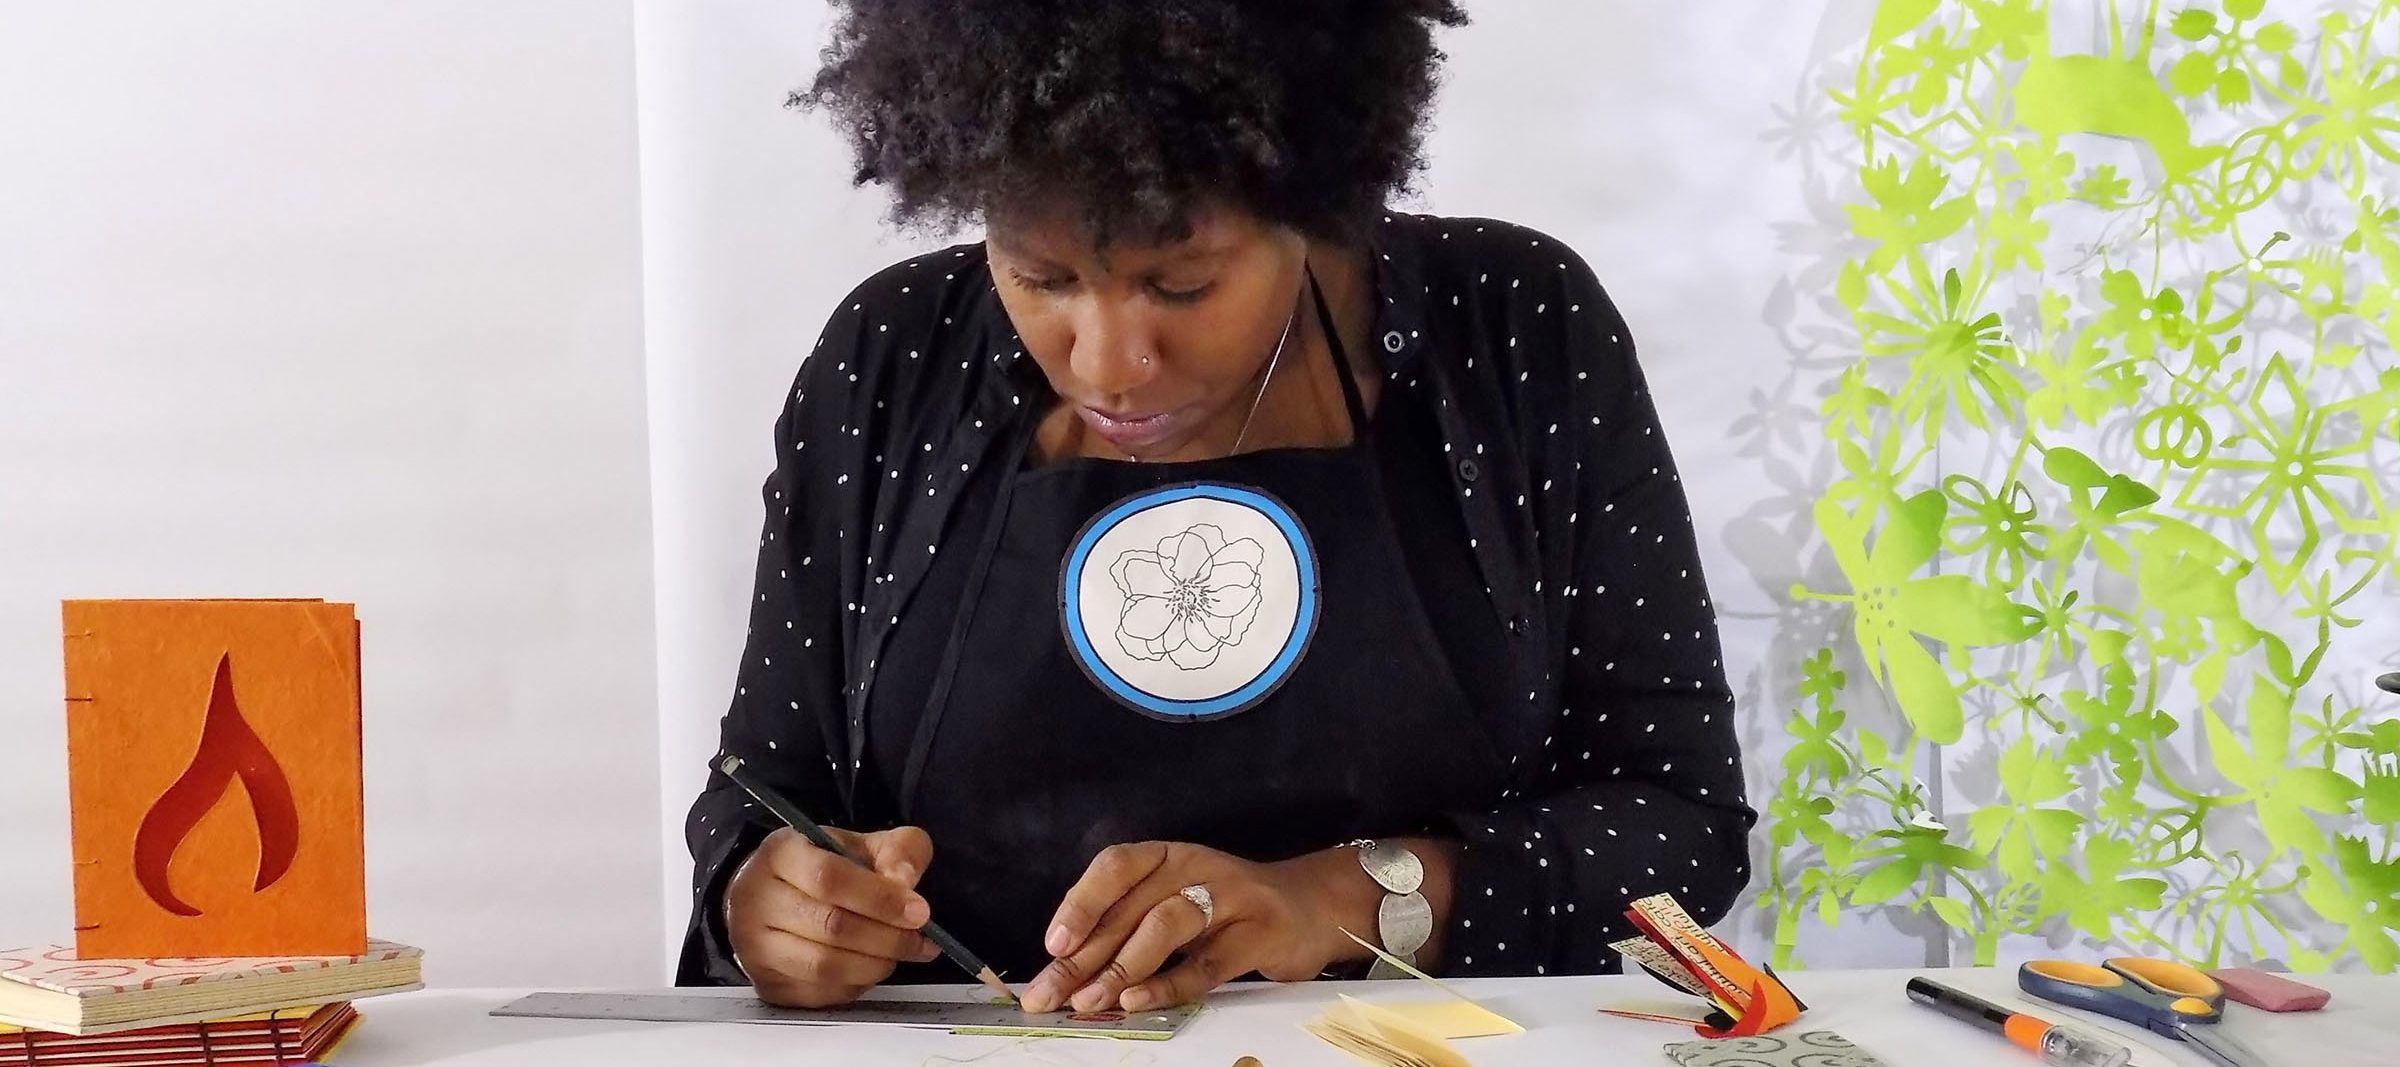 A dark-skinned adult woman holds a pencil and draws on papers on a table, with an artist's book to her right. She wears dark clothes and has a short afro.